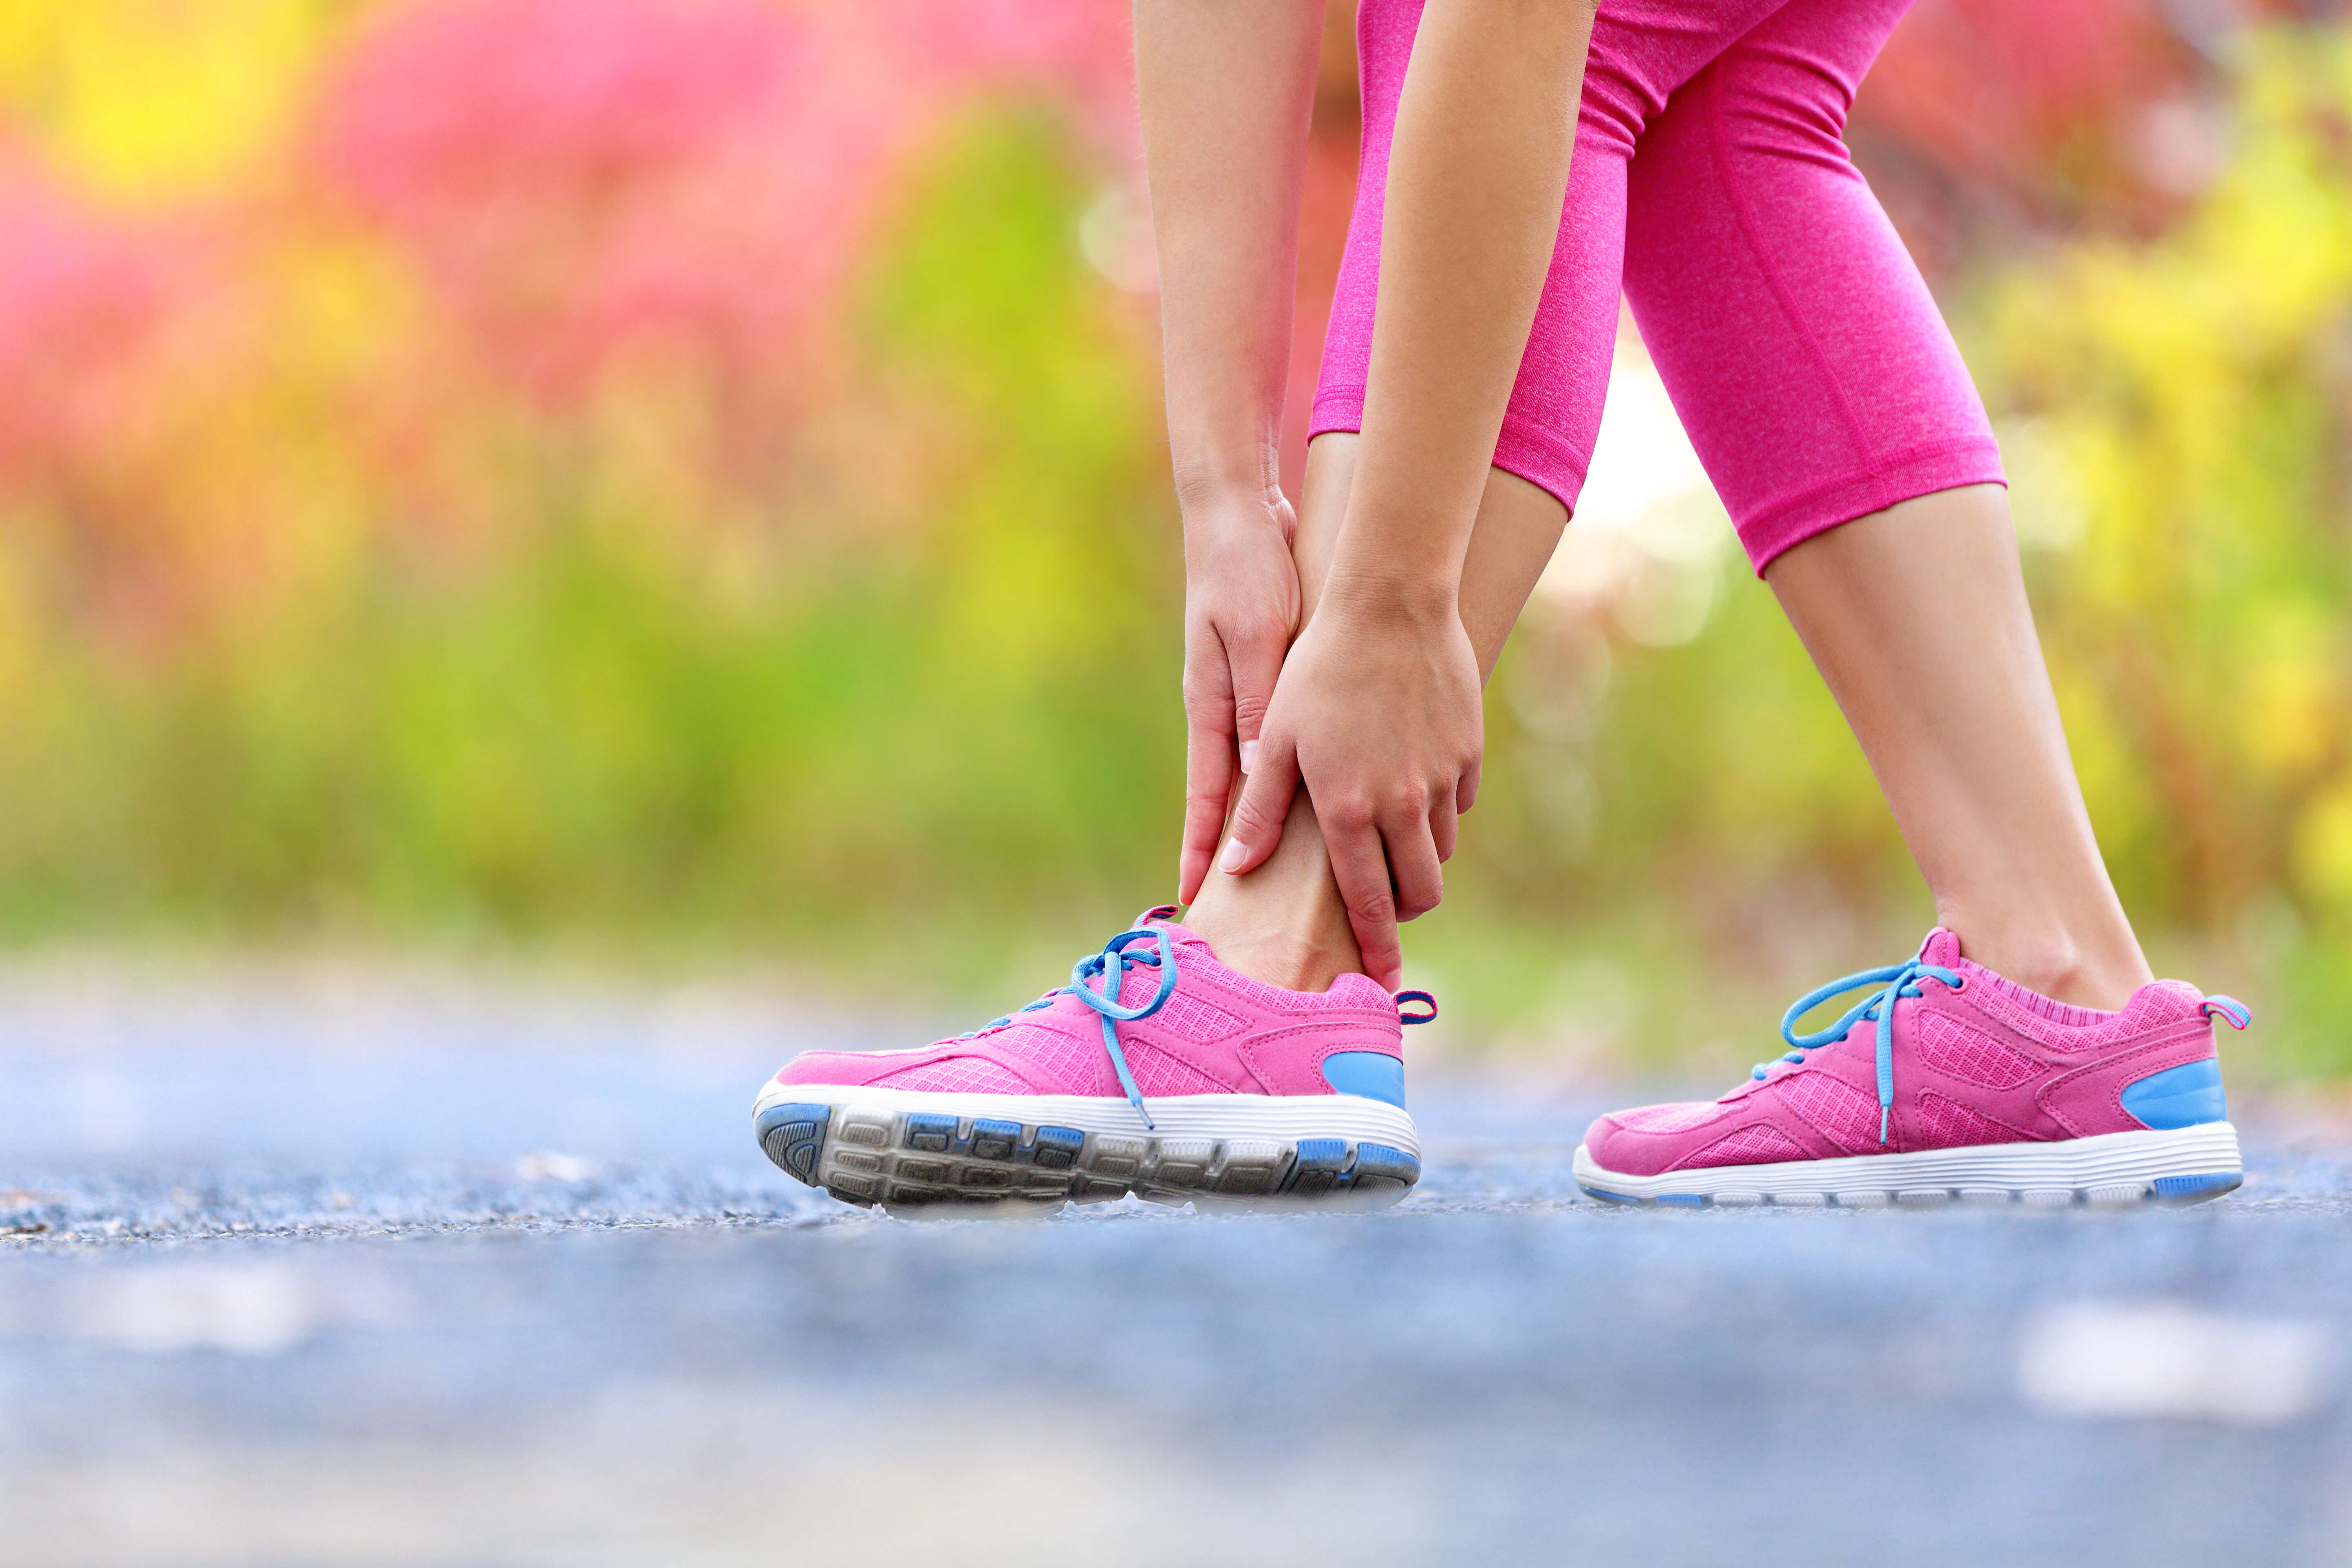 Overview of Foot and Ankle Pain